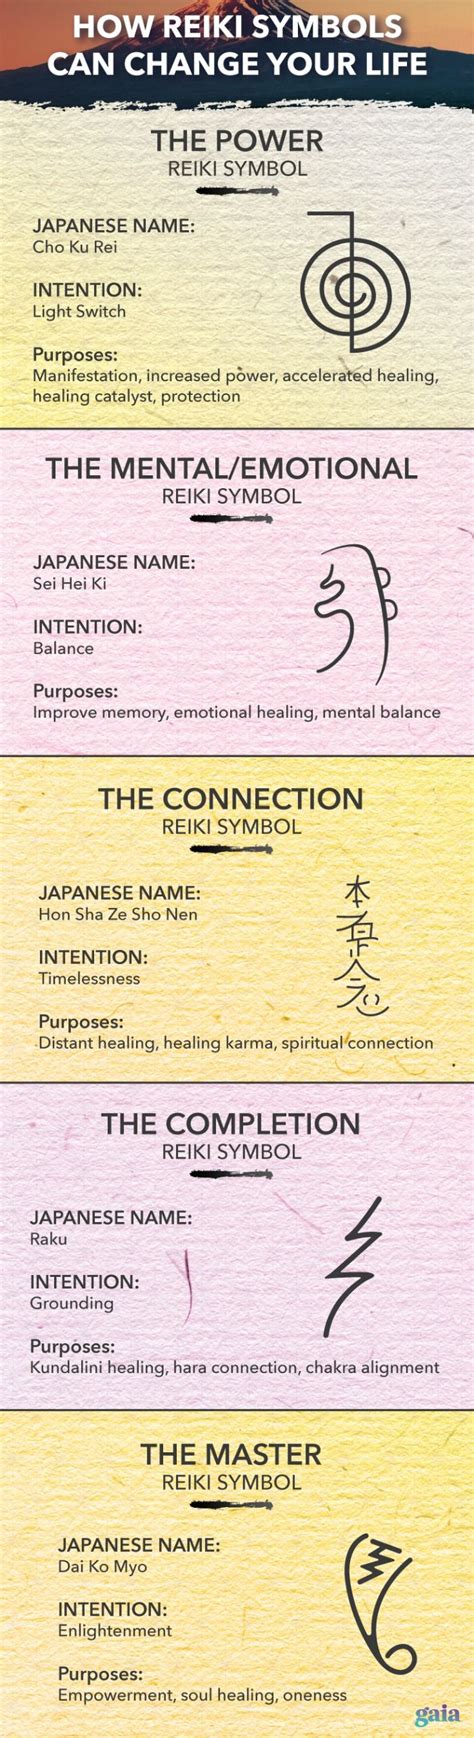 How Reiki Symbols Can Change Your Life | Health and ...